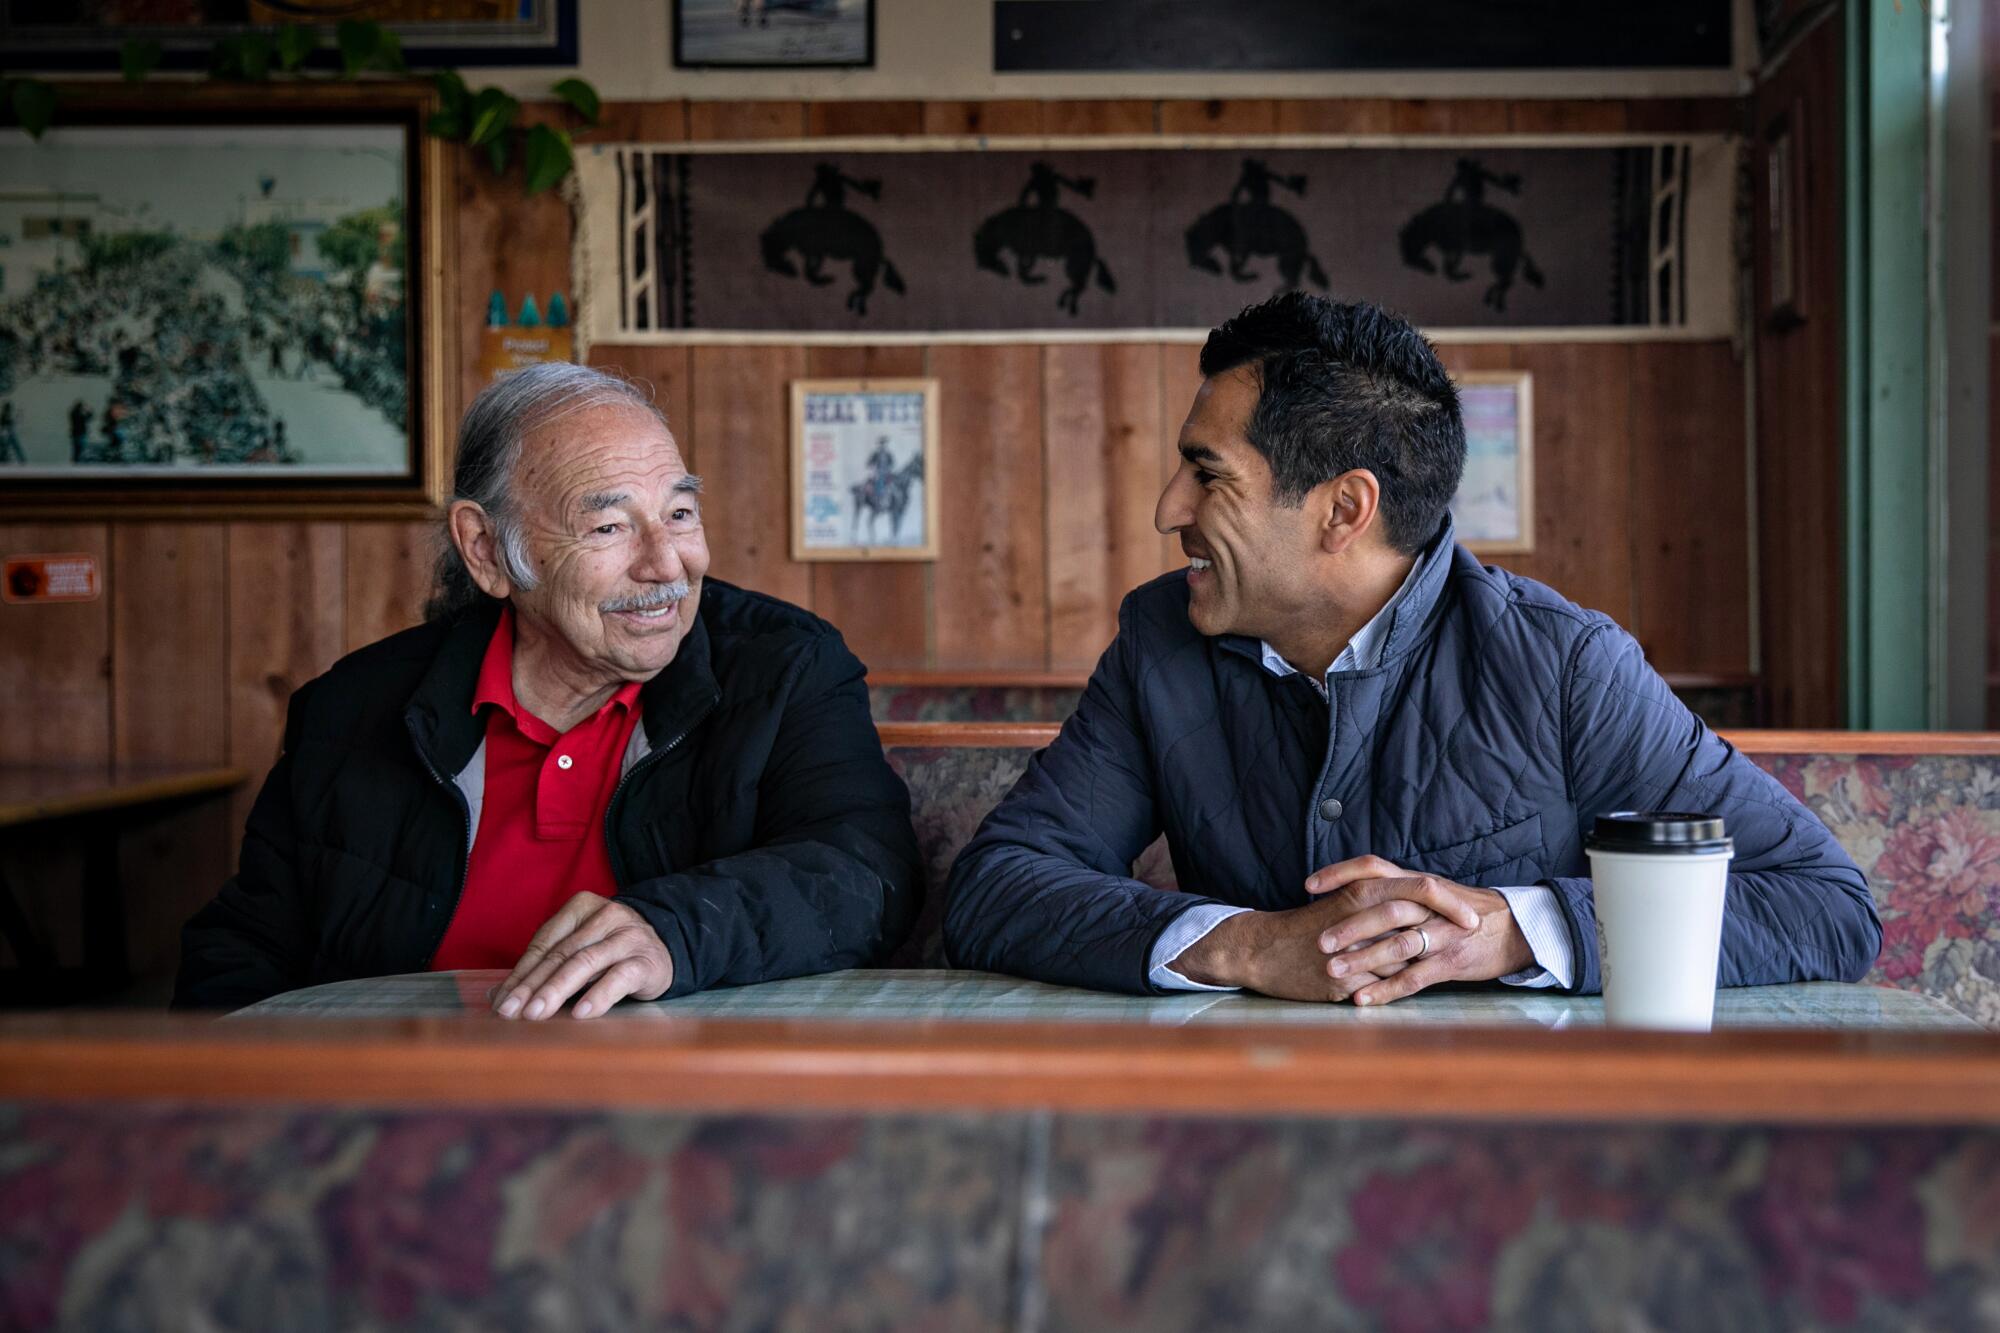 California Assembly Speaker Robert Rivas, right, catches up with an old family friend at the Paicines General Store.